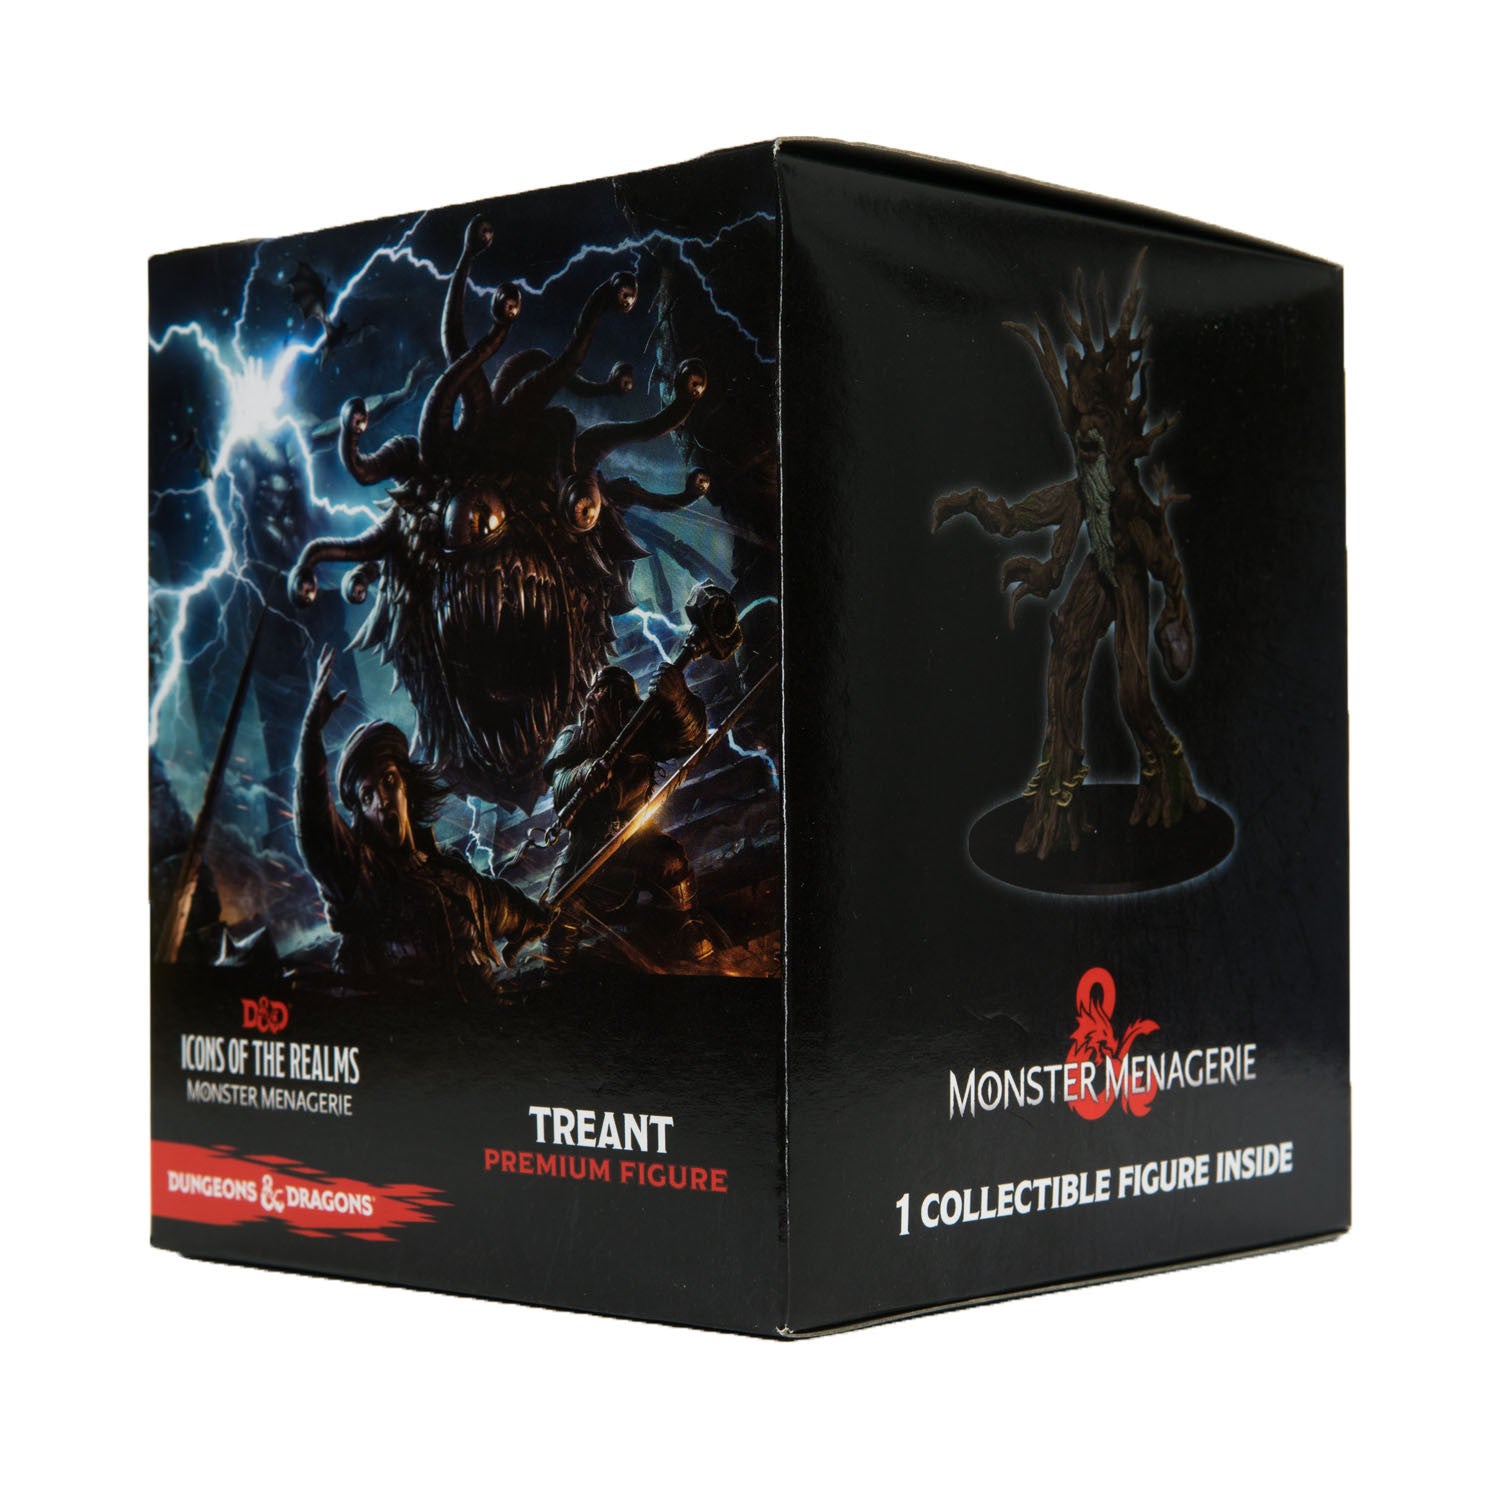 D&D Icons of the Realms: Monster Menagerie Treant Premium Figure